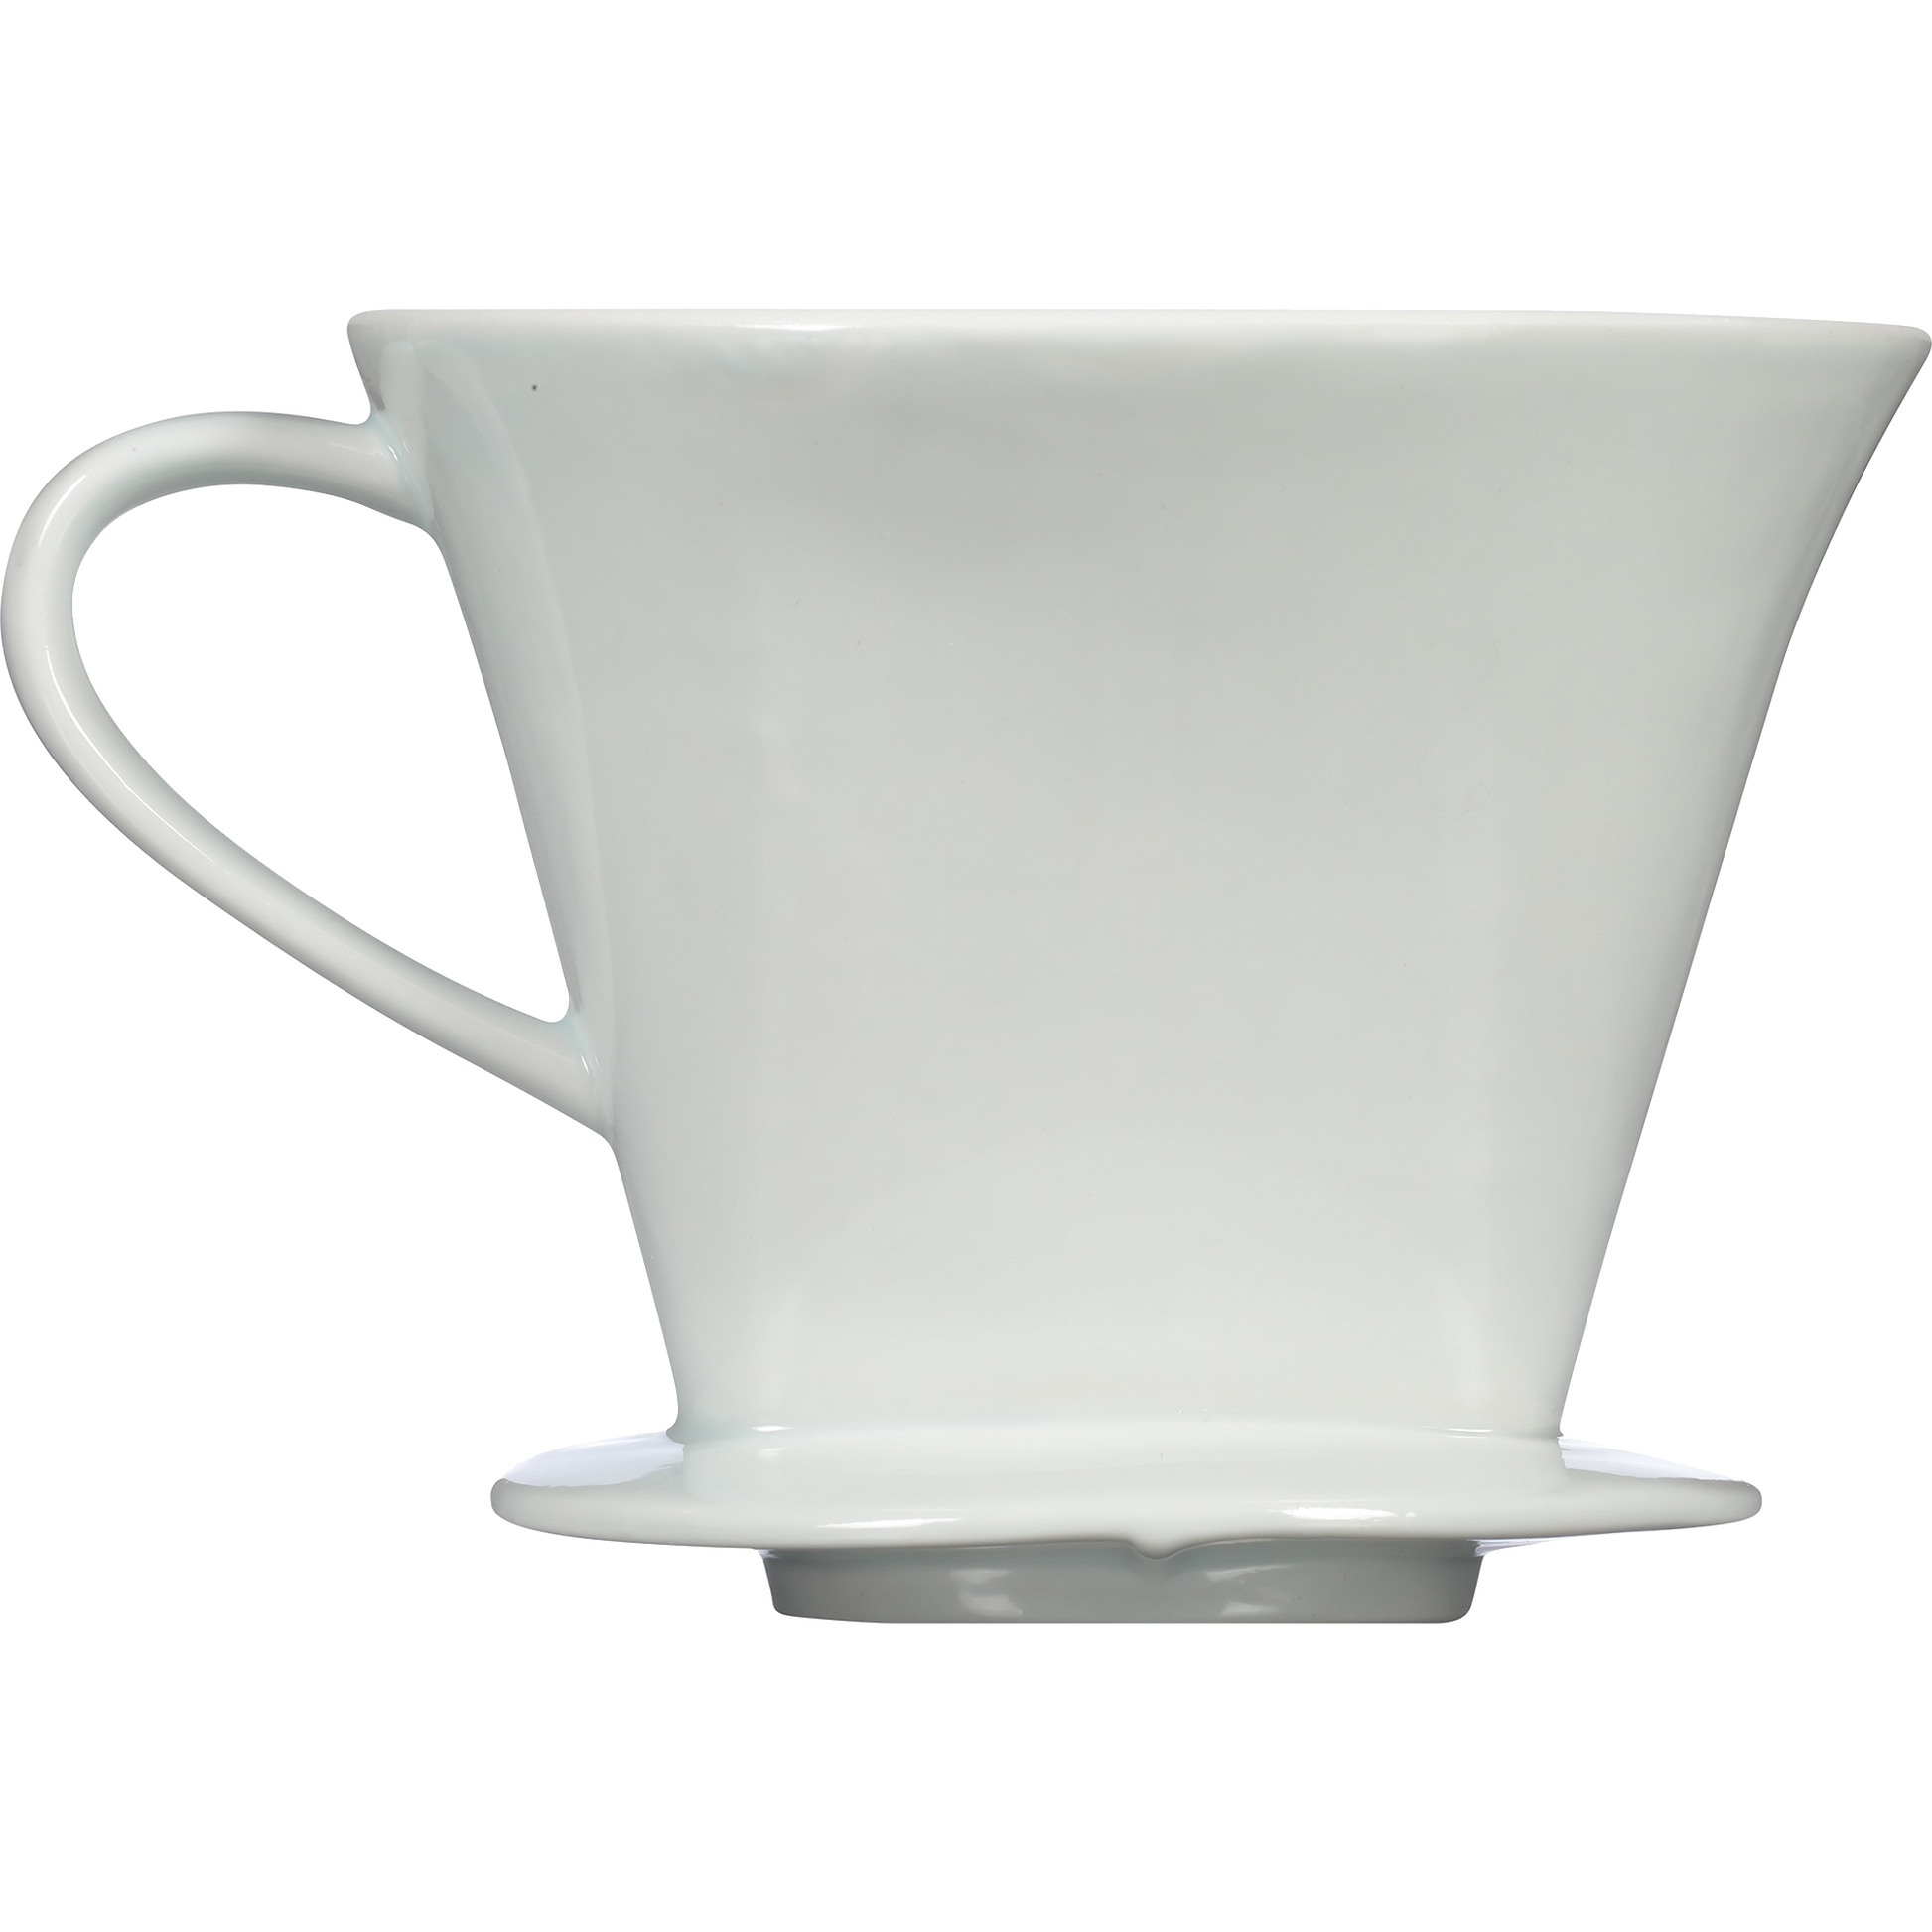 Brandless Porcelain Pour Over Coffee Cone